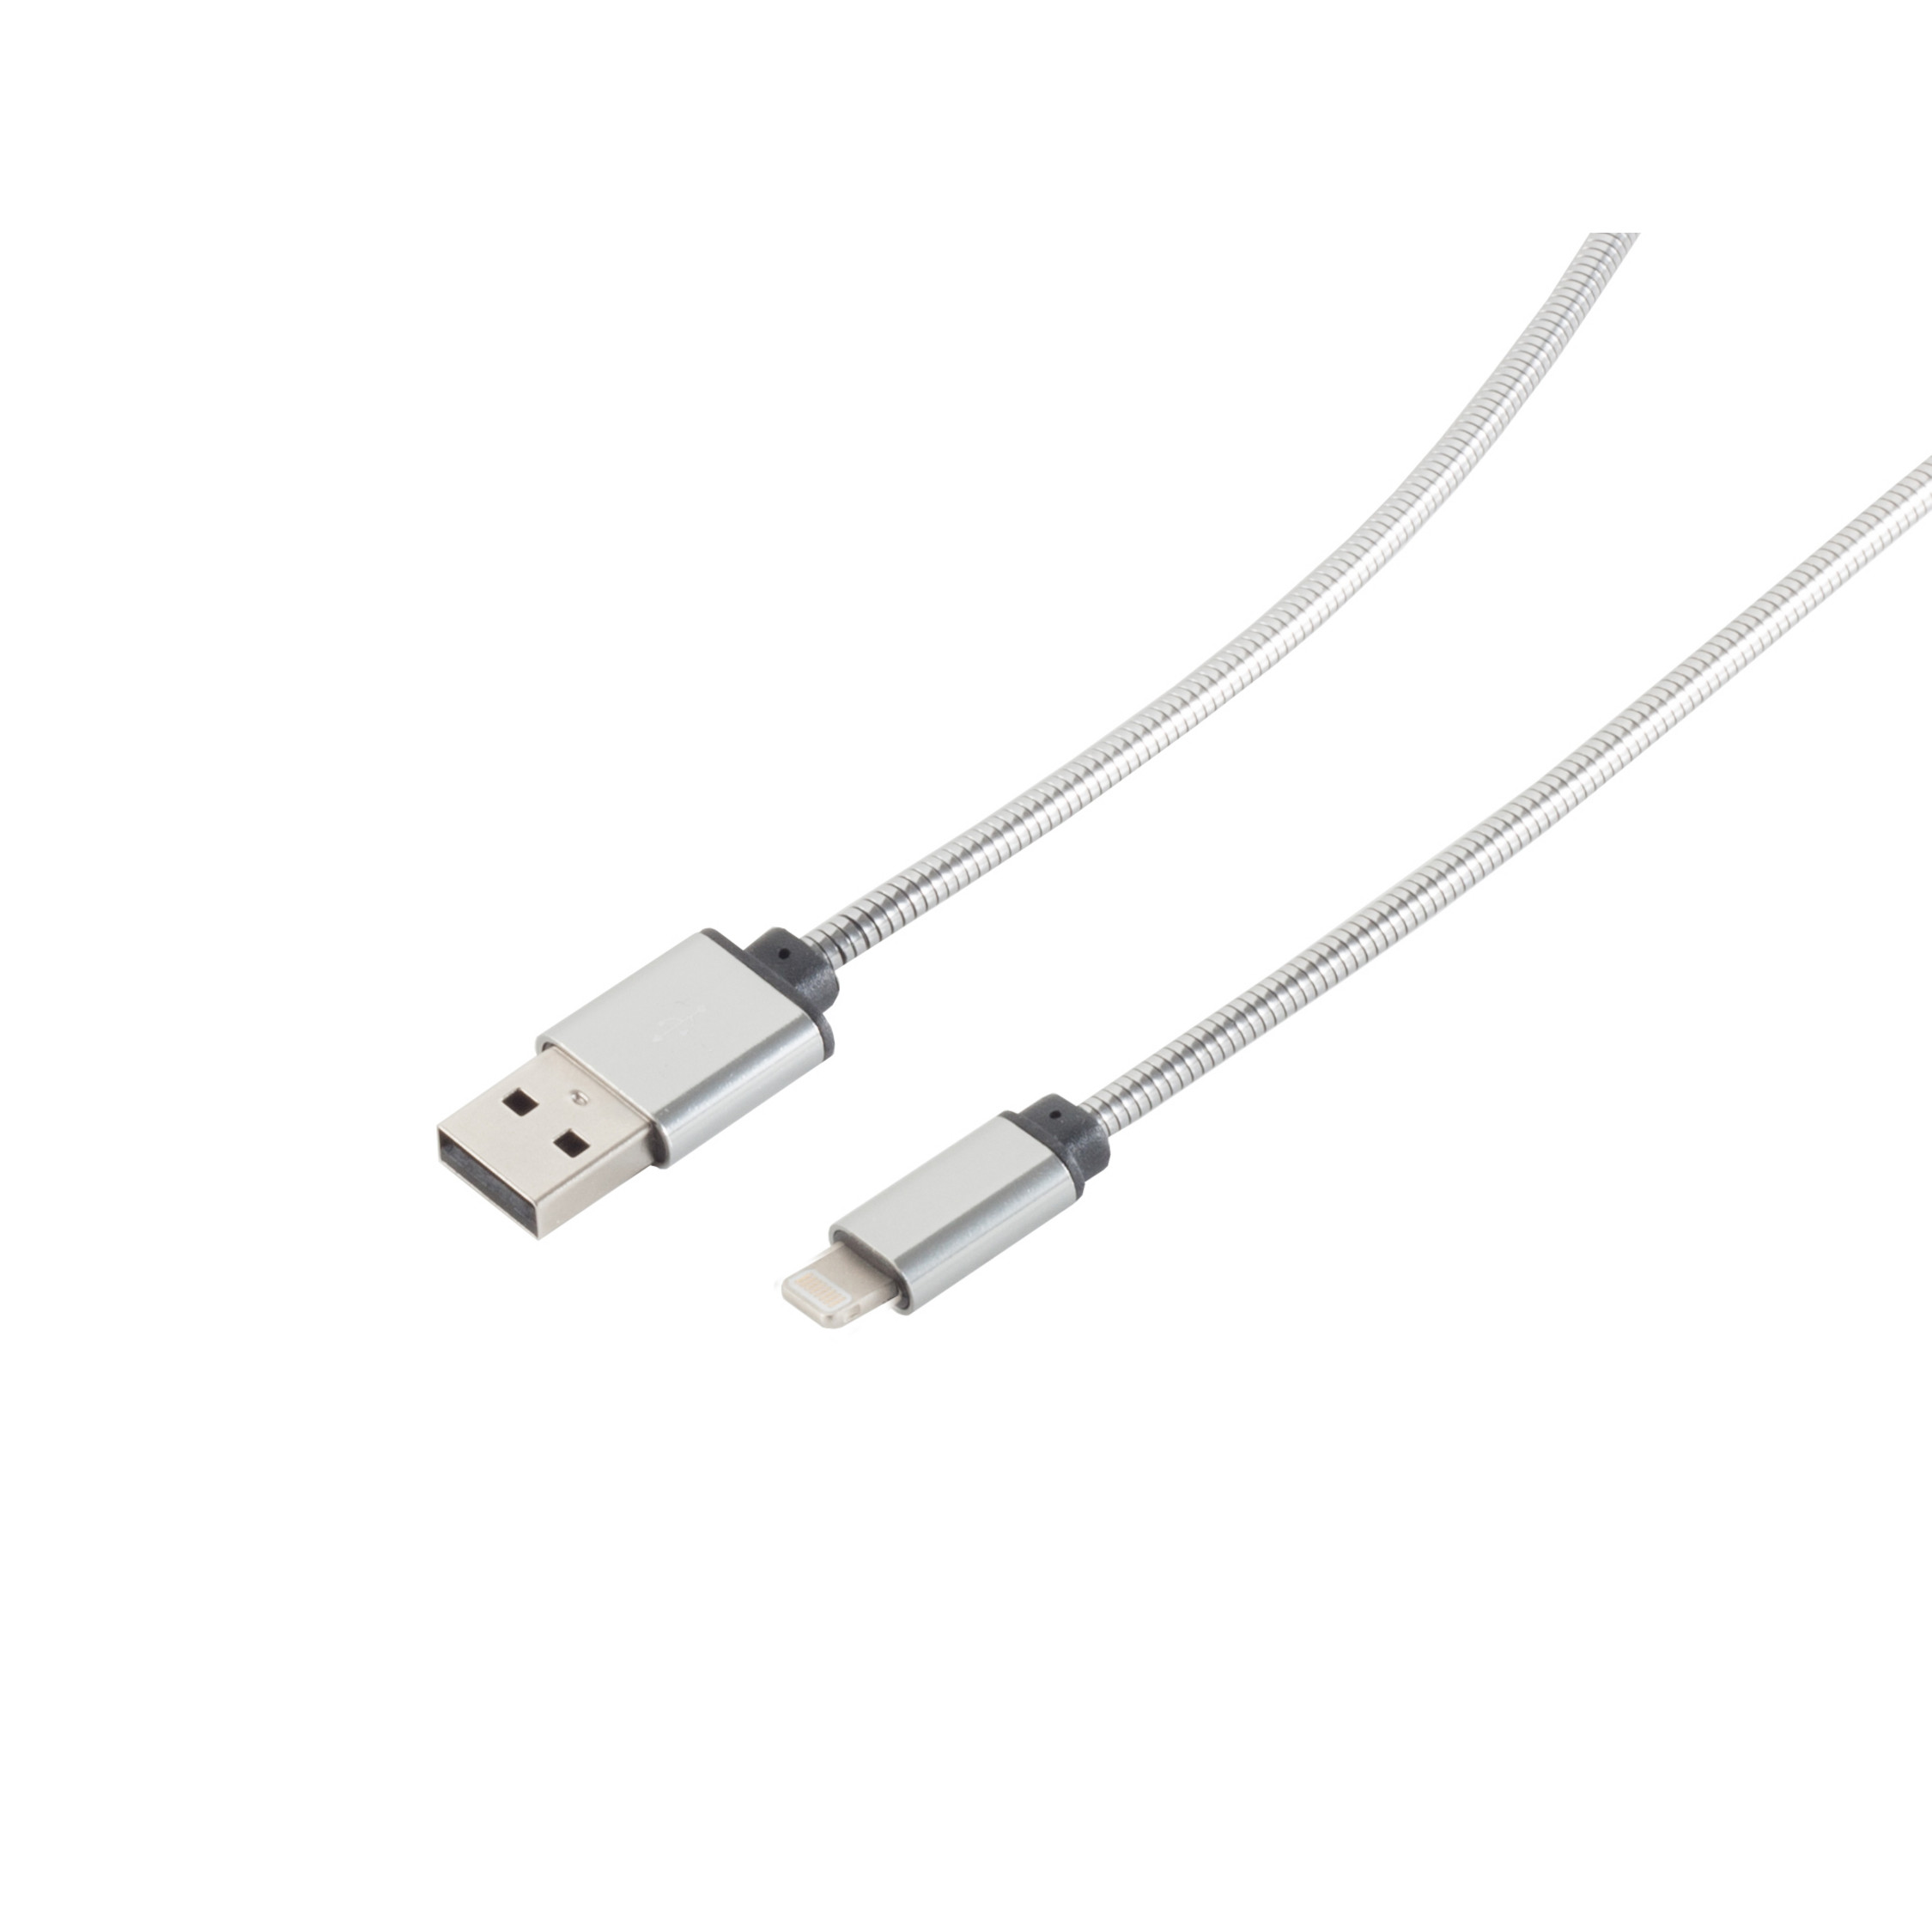 USB USB Silber MAXIMUM Kabel USB Kabel 8-pin CONNECTIVITY S/CONN Lade-Sync 1m Steel A/